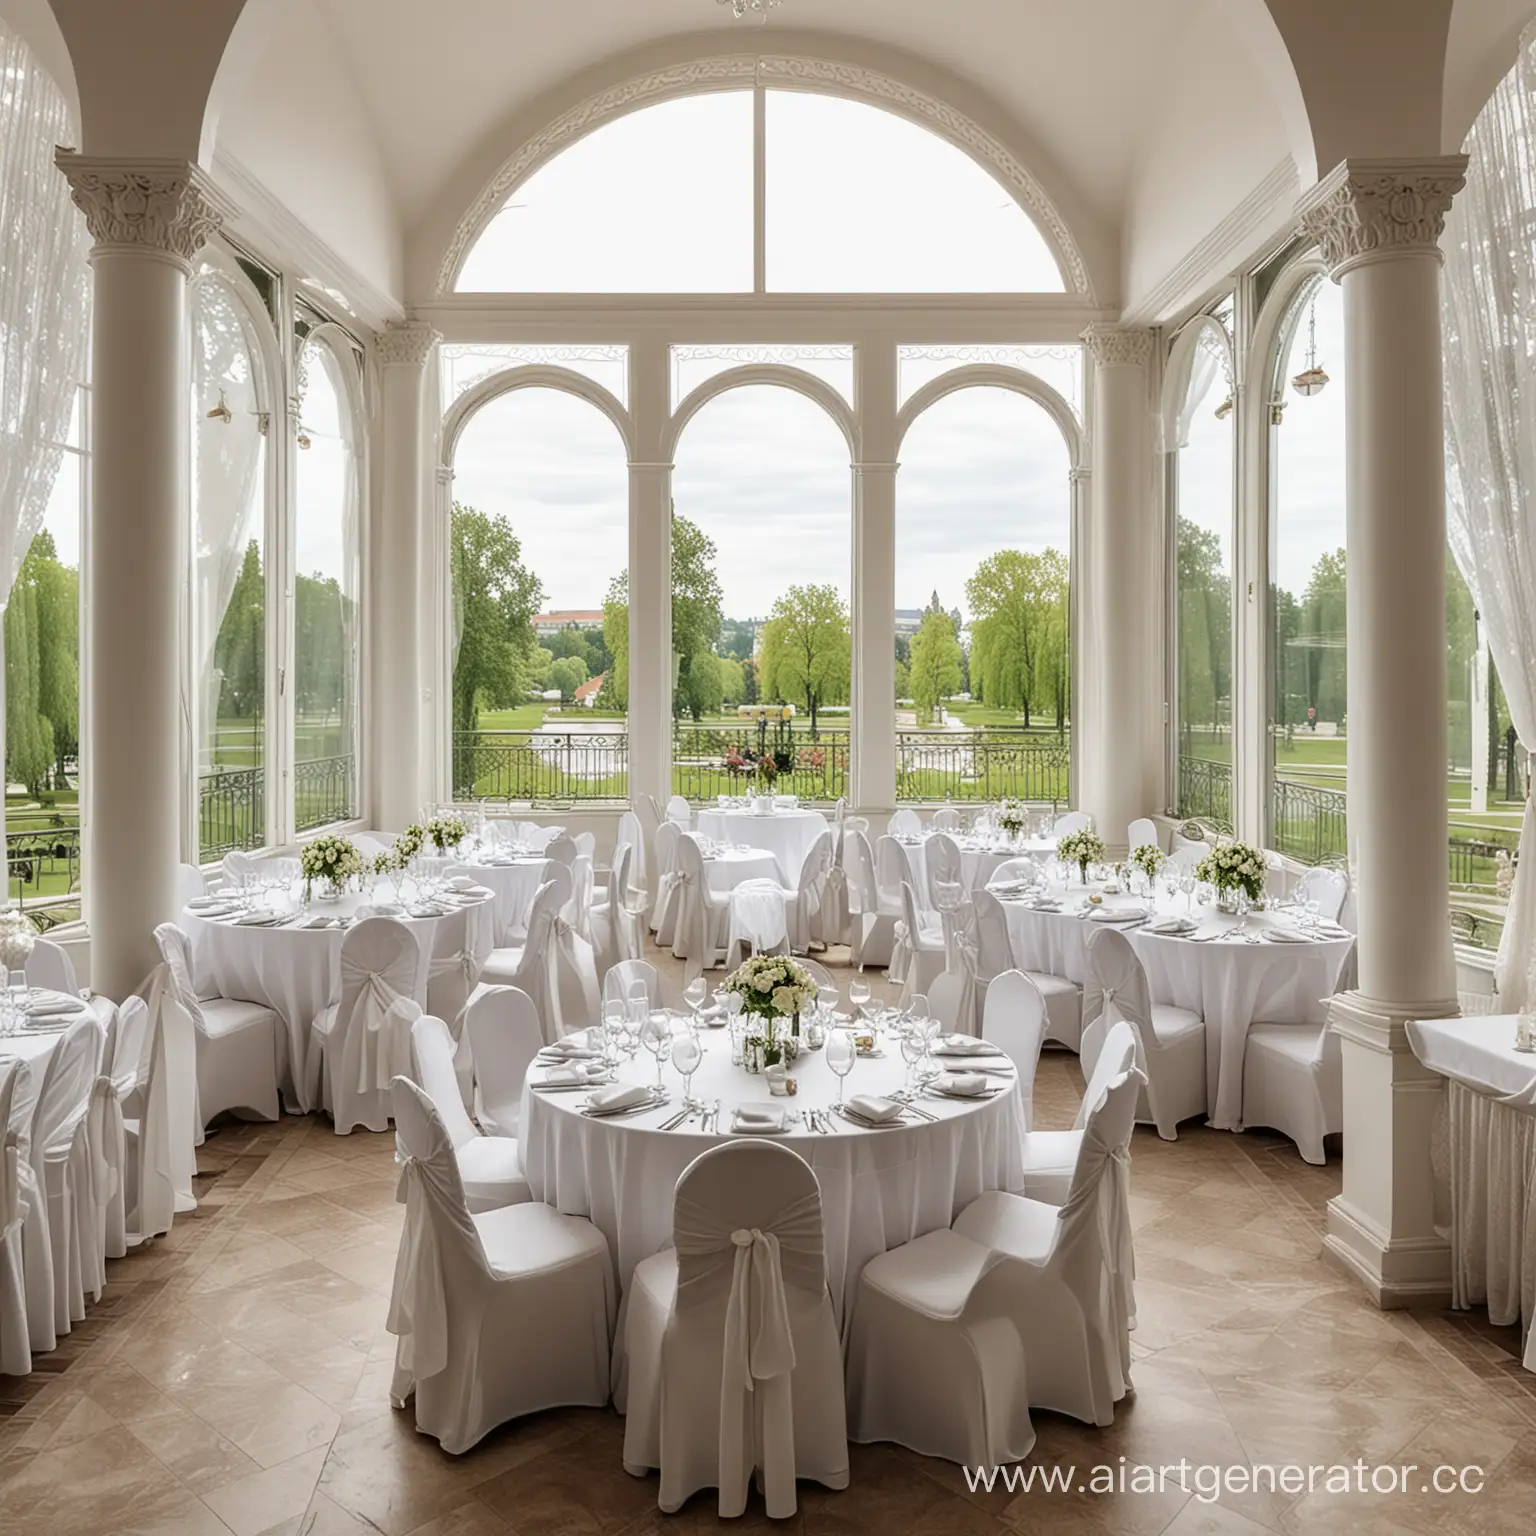 Elegant-Wedding-Buffet-with-Palace-Views-and-Park-Surroundings